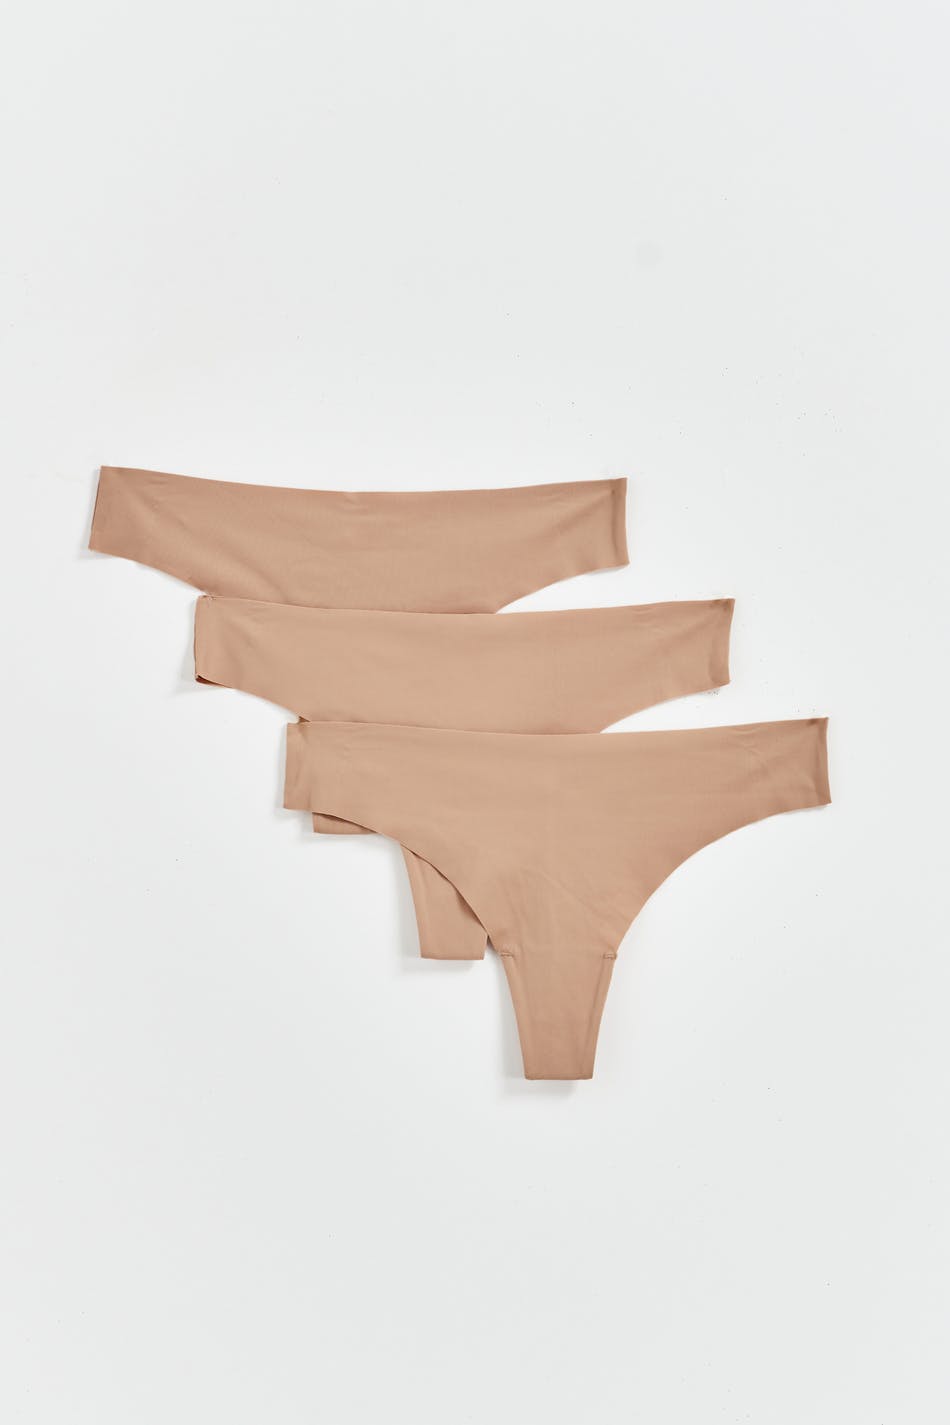 Gina Tricot - 3-pack invisible thong - trosor-3-pack - Beige - XS - Female